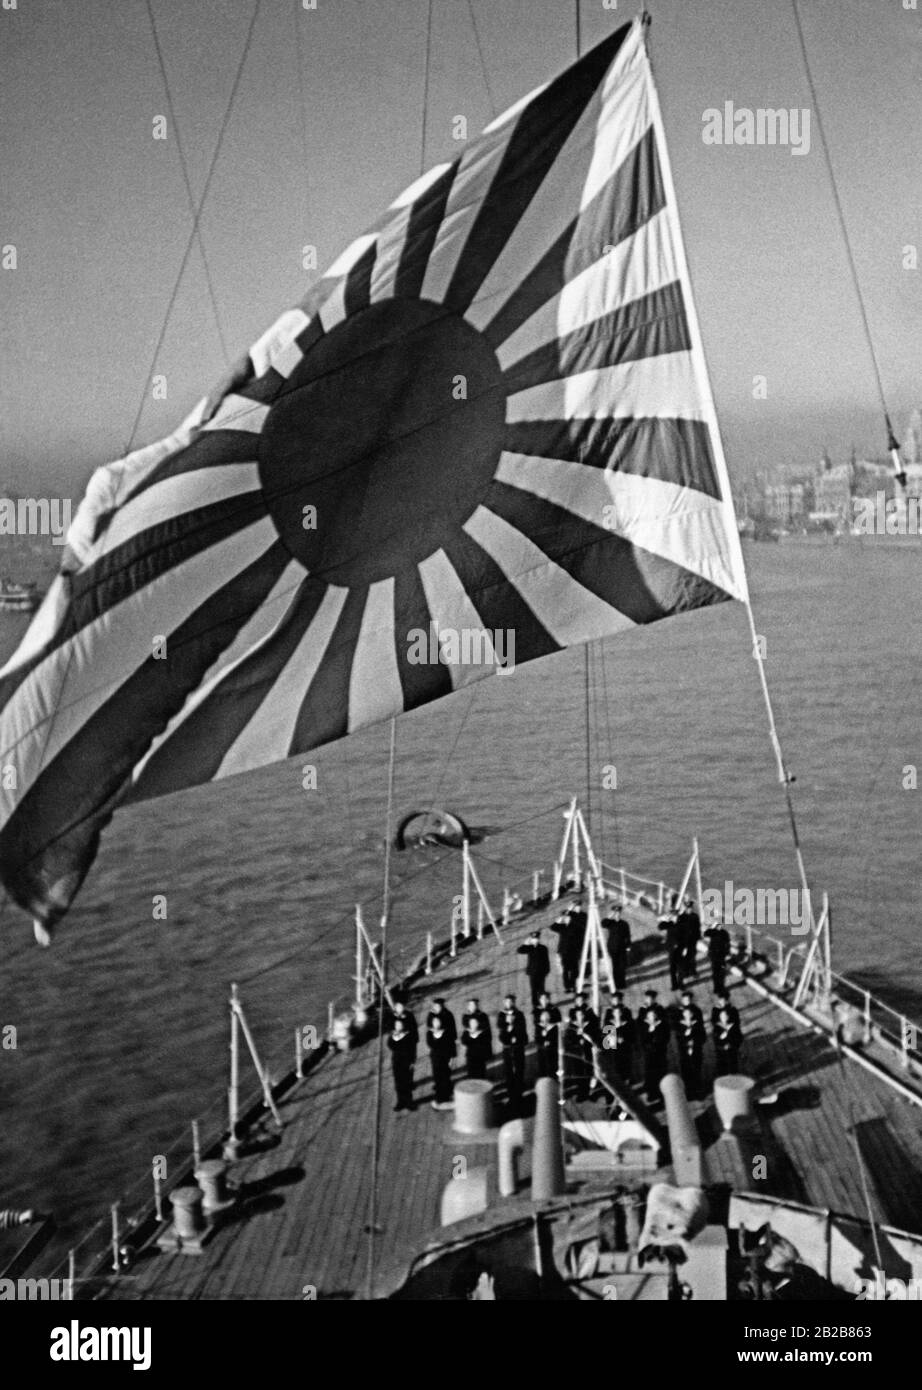 The flag of the Imperial Japanese Navy is hoisted on board the Japanese flagship Izumo. Below the flag there are saluting sailors. Stock Photo